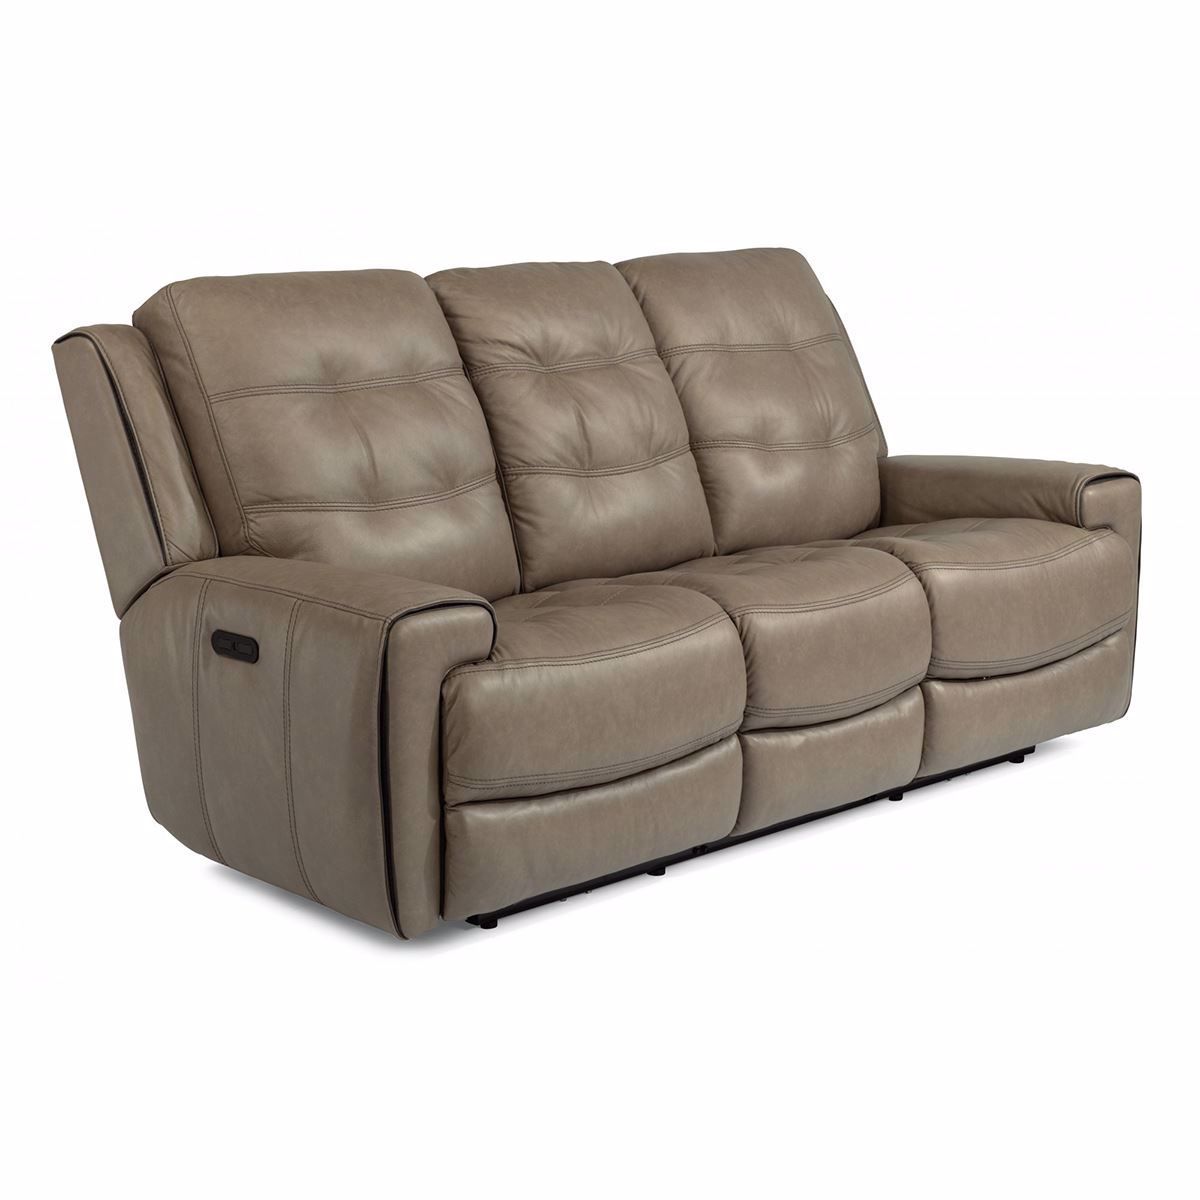 Wicklow Power Reclining Leather Sofa With Power Headrest Intended For Charleston Power Reclining Sofas (View 1 of 15)